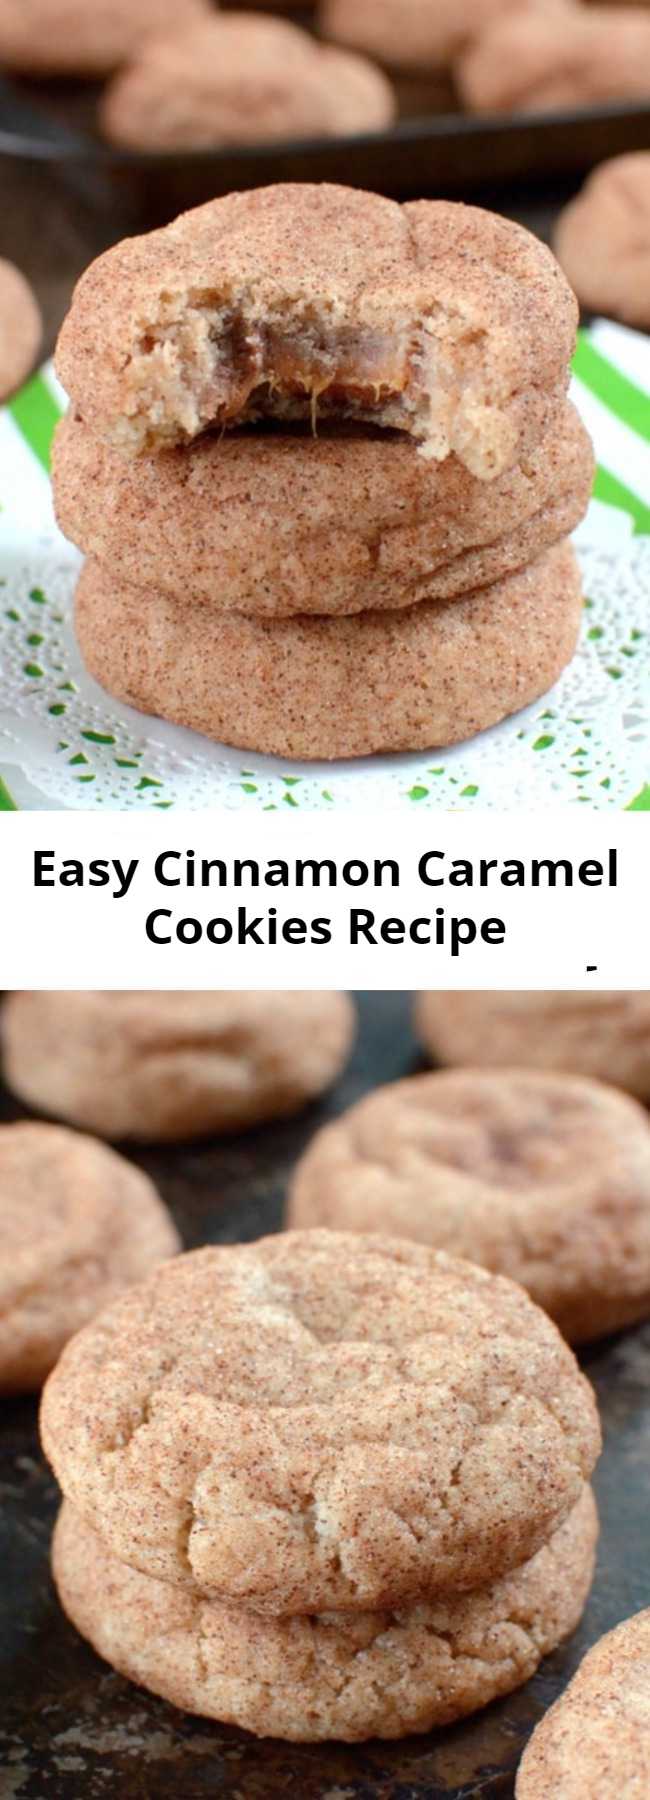 Easy Cinnamon Caramel Cookies Recipe - These hidden candy center in these Cinnamon Caramel Cookies will make everyone smile when they find it. Fill your cookie jar with a batch today!